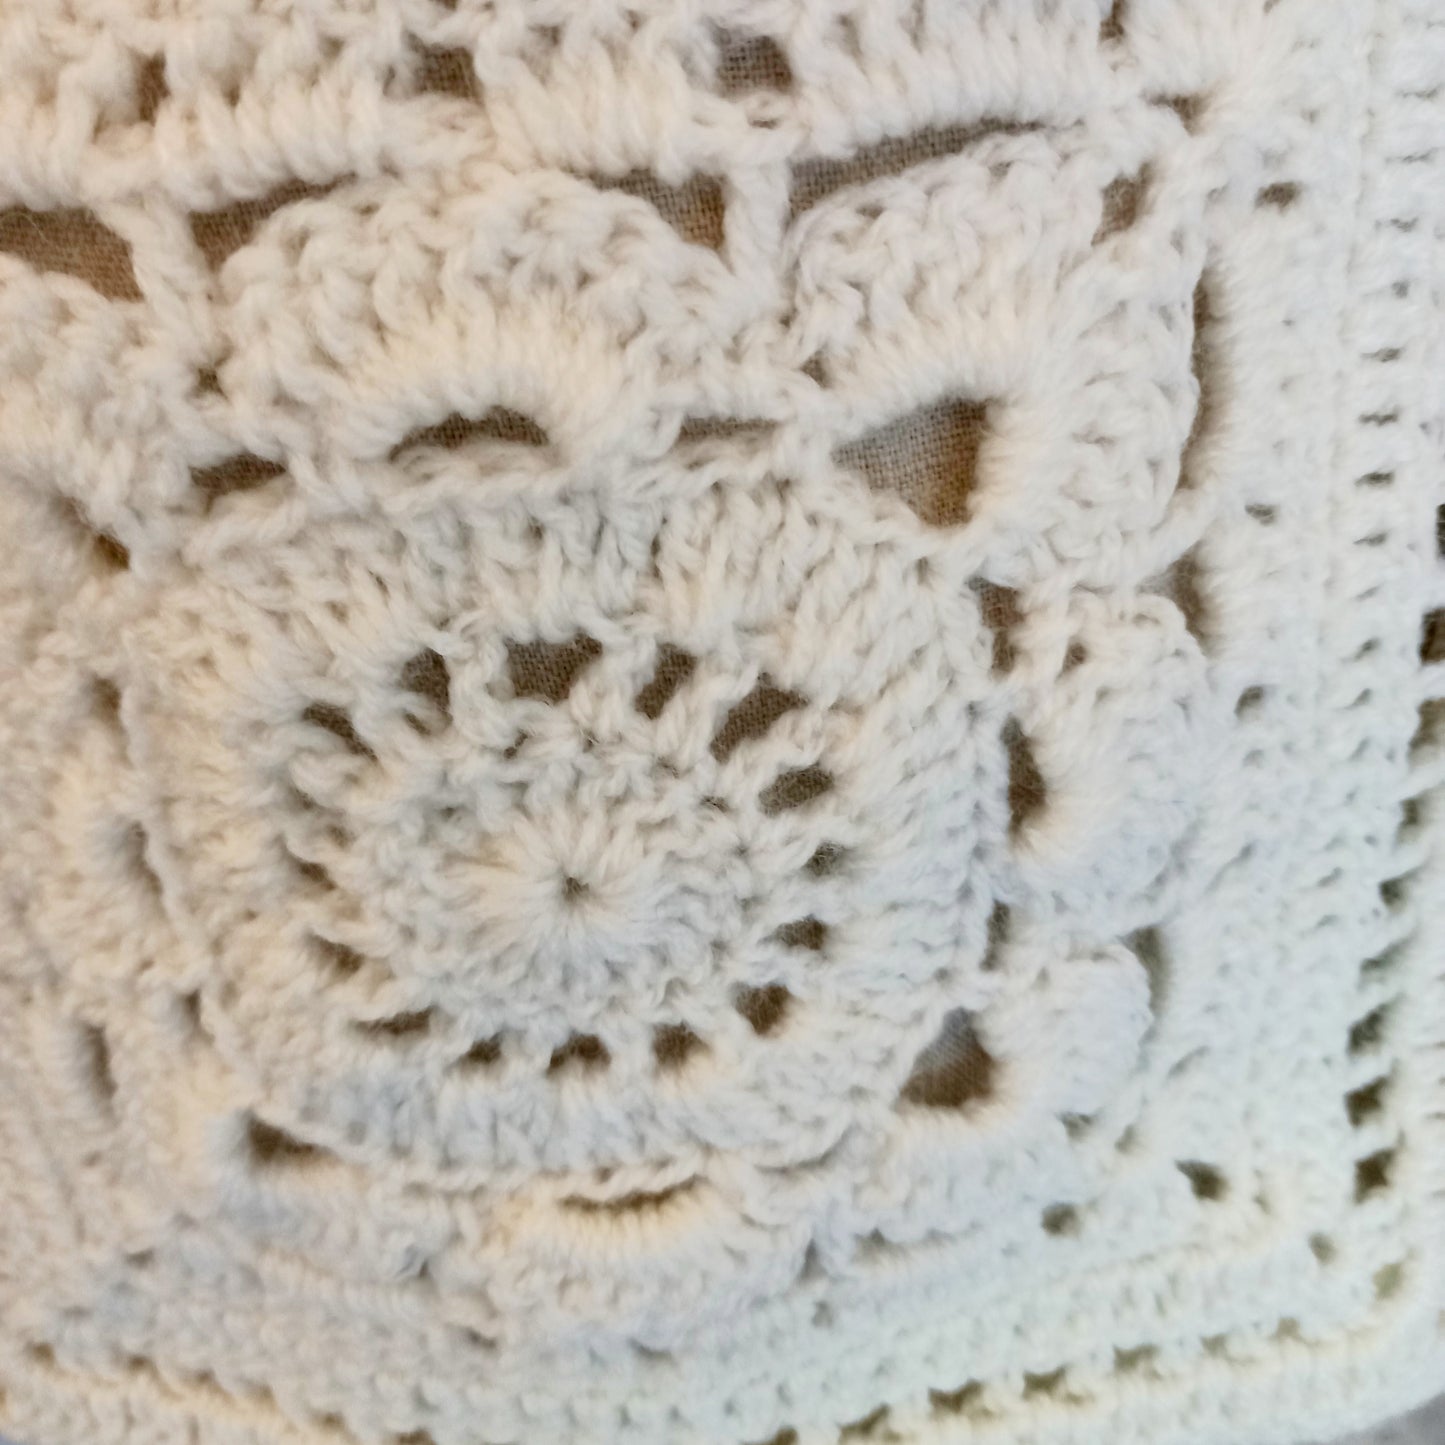 "Hand made crochet bag with flower details"